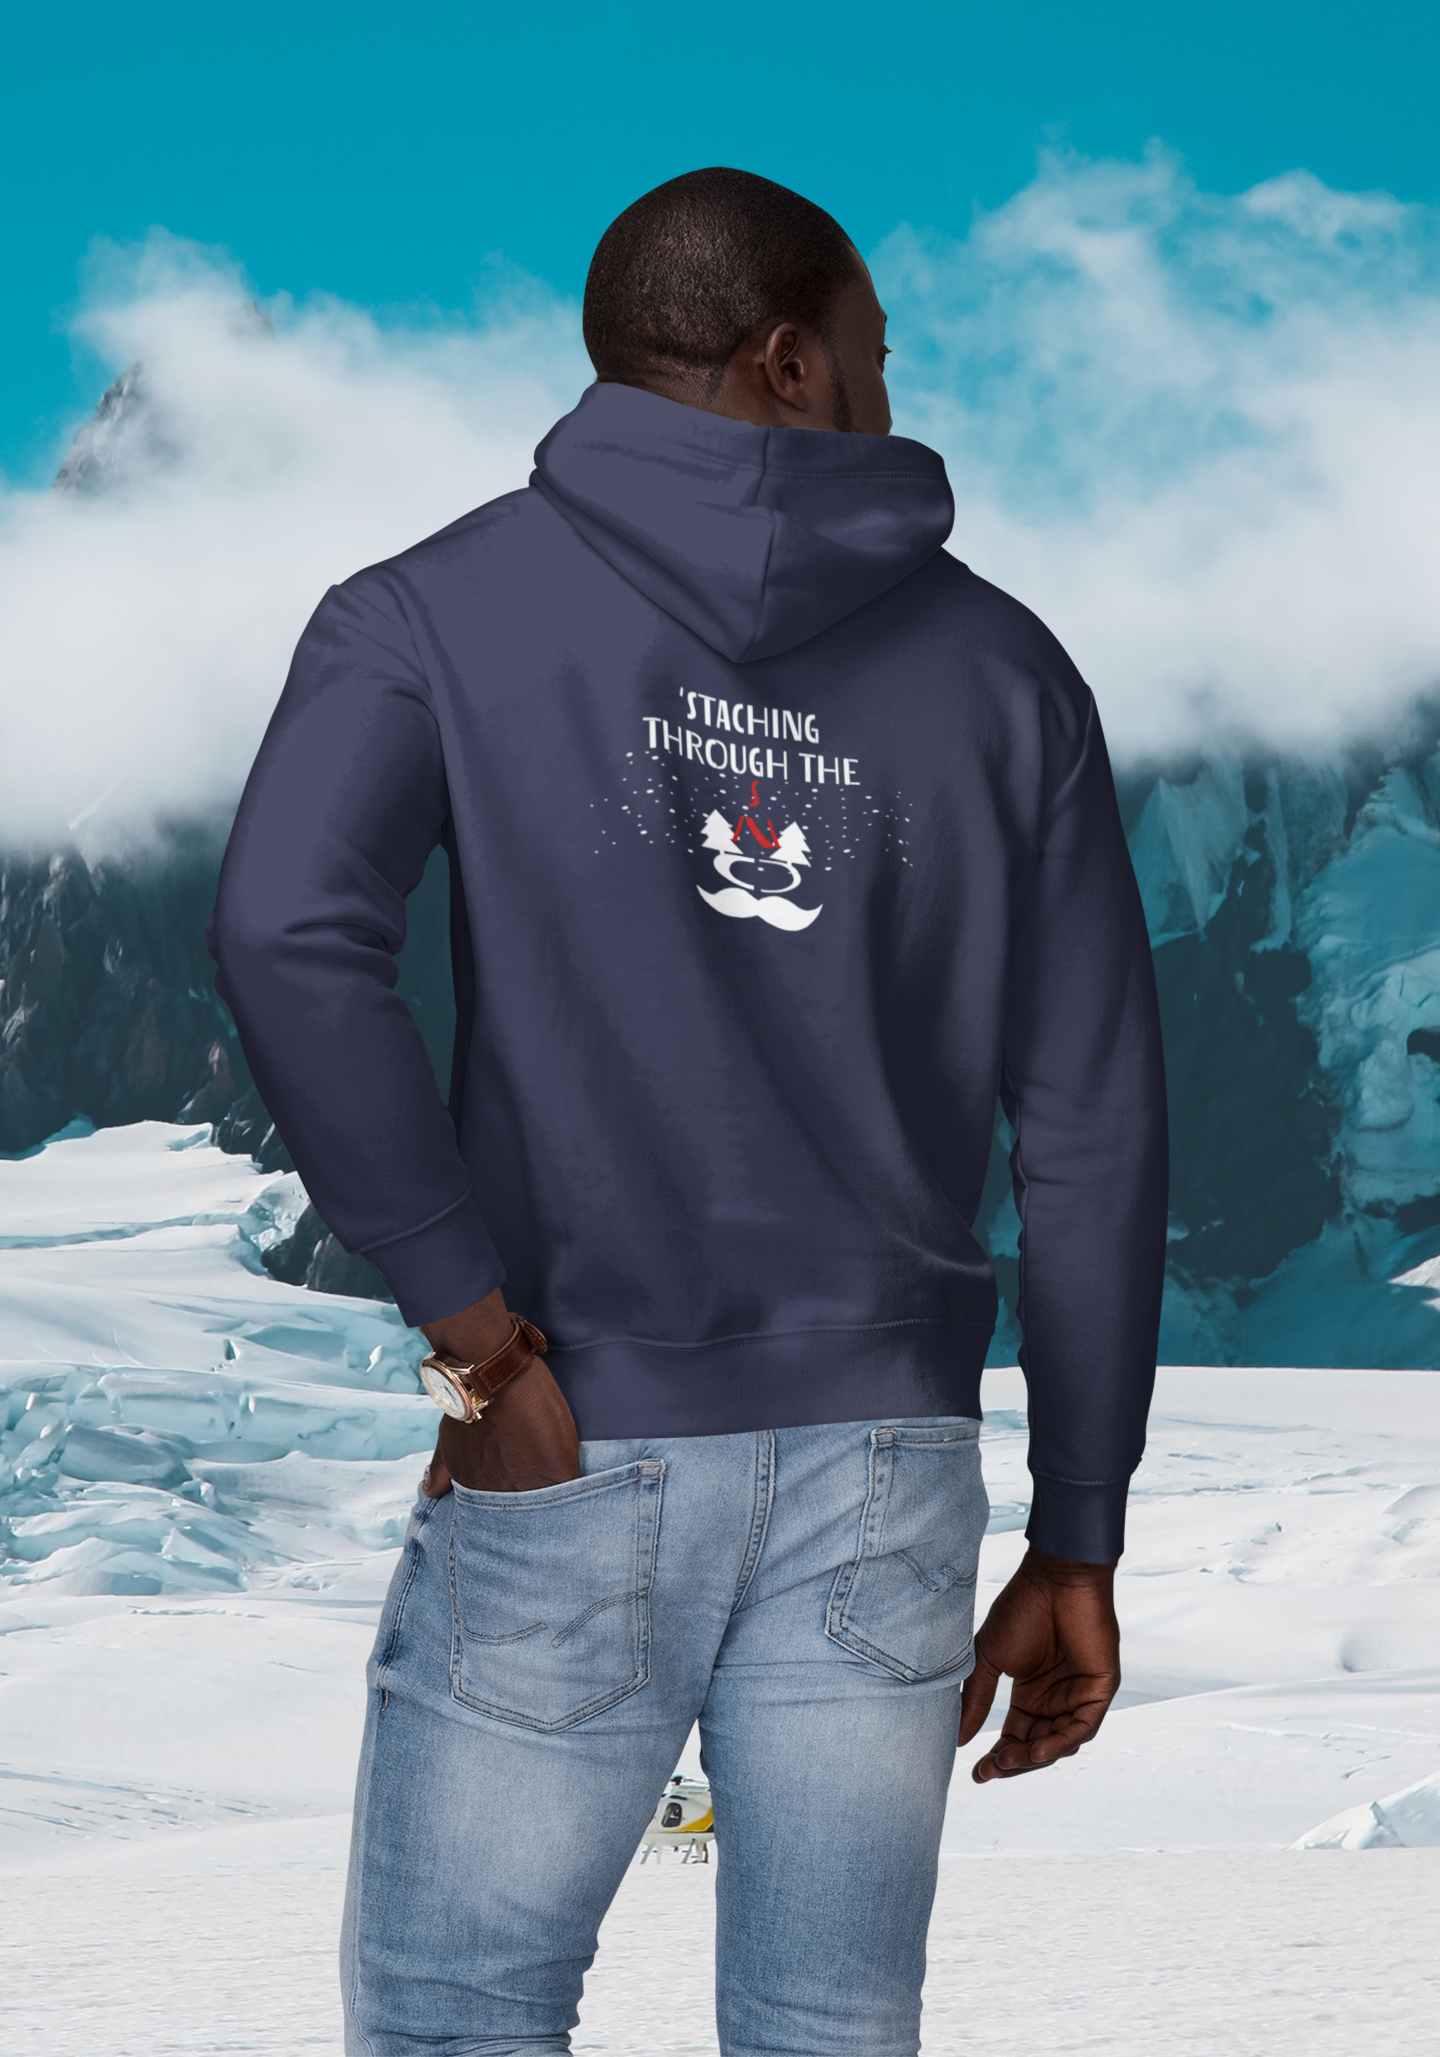 Hoodies for Men ( STACHING THROUGH THE SNOW )